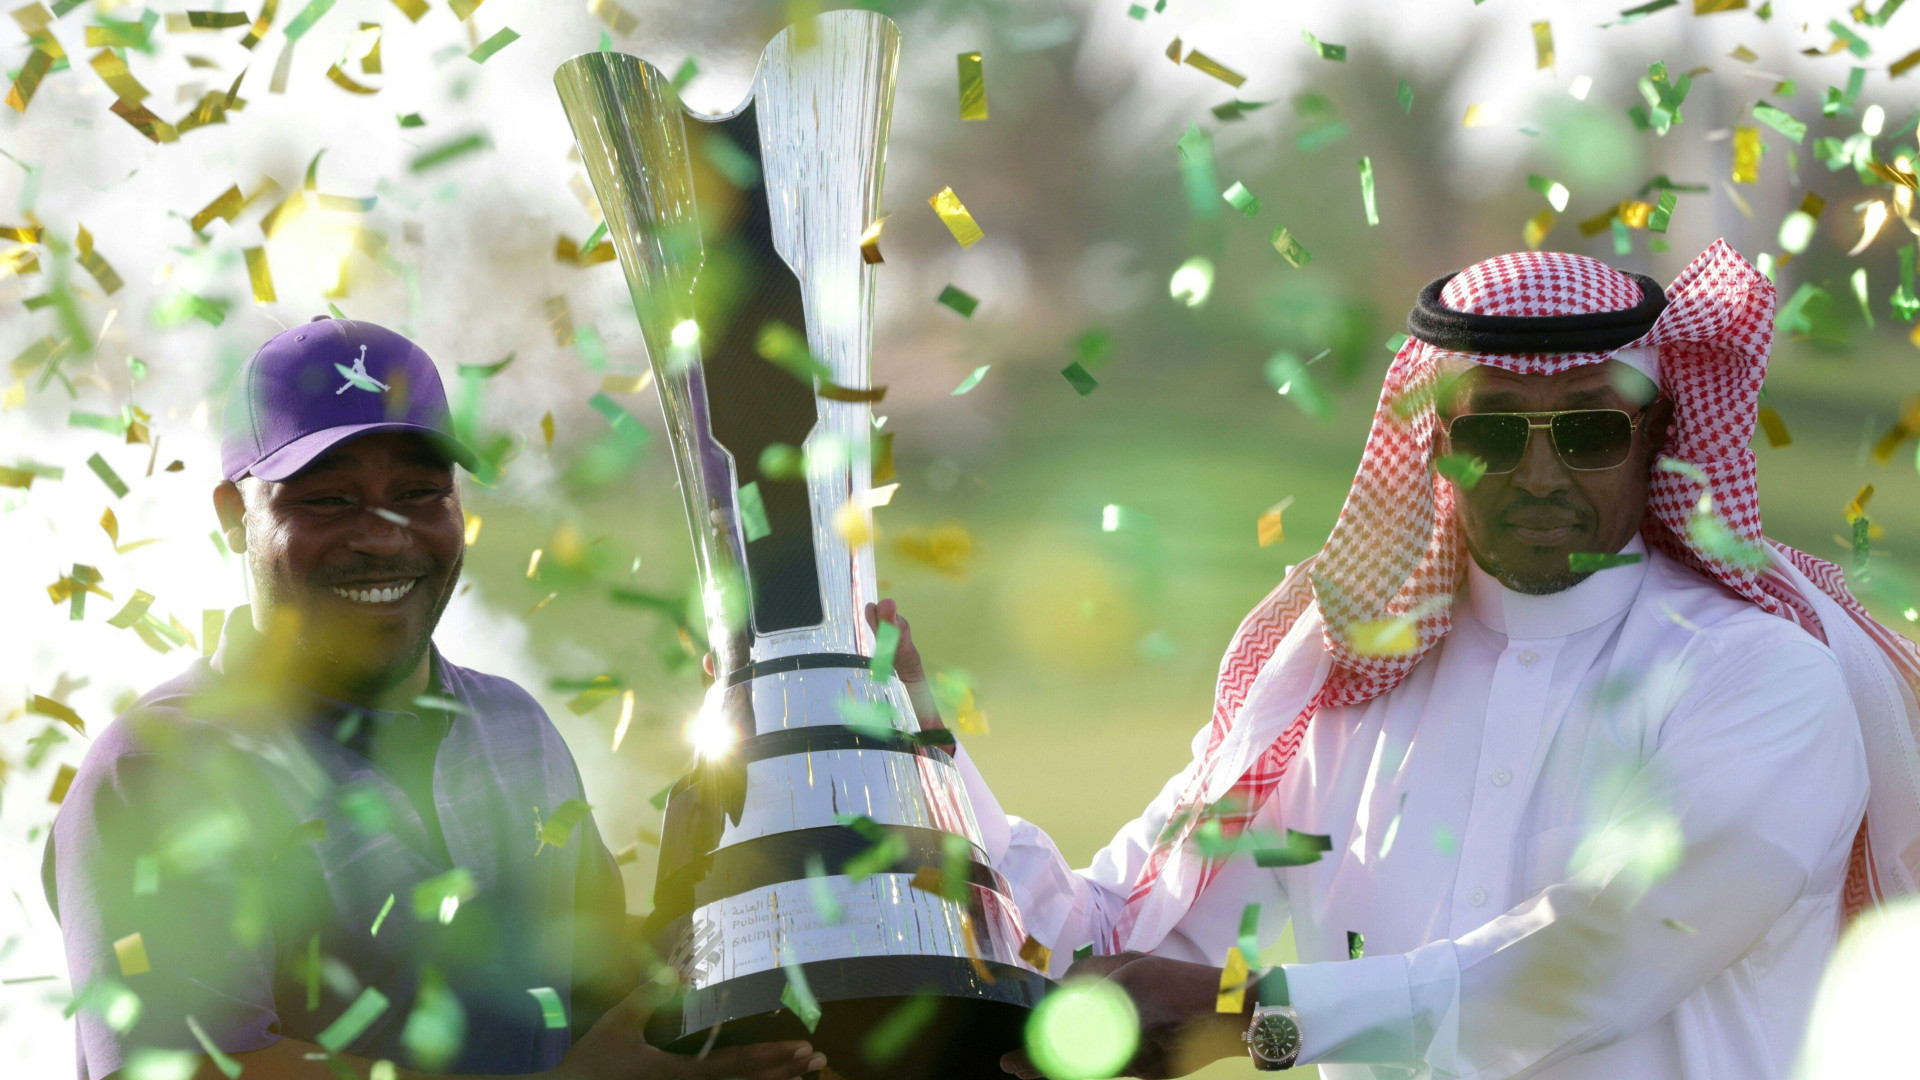 American Harold Varner III is presented the trophy by the deputy chairman of Saudi Golf Federation Majed al-Sorour after winning the PIF Saudi International in Jeddah, on 6 February, 2022. (AFP)